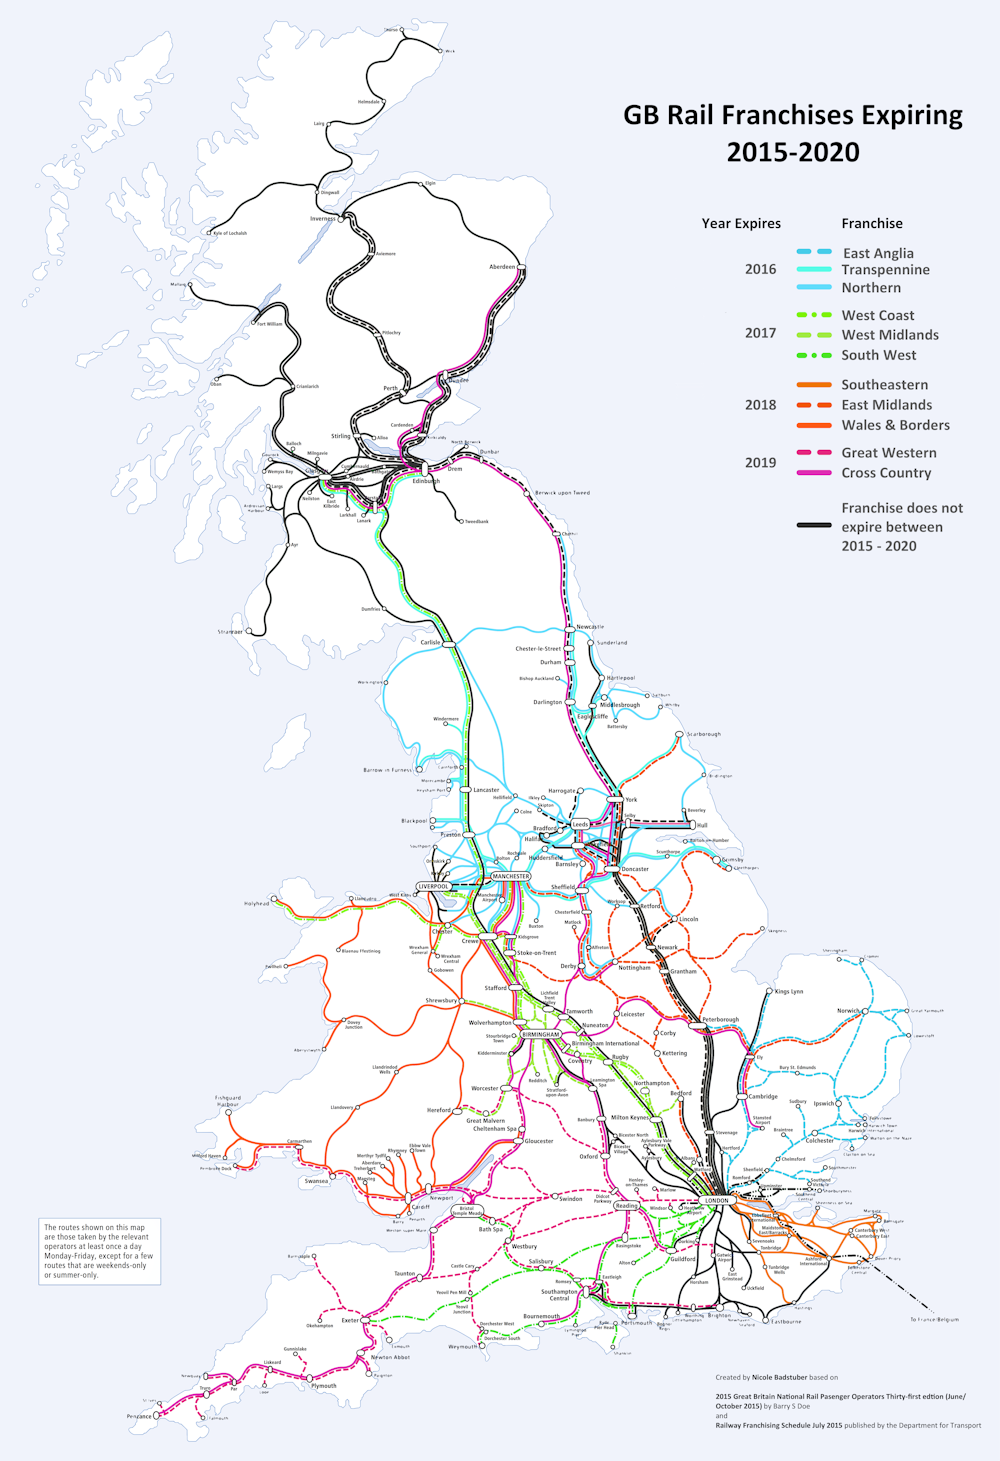 The case for re-nationalising Britain's railways